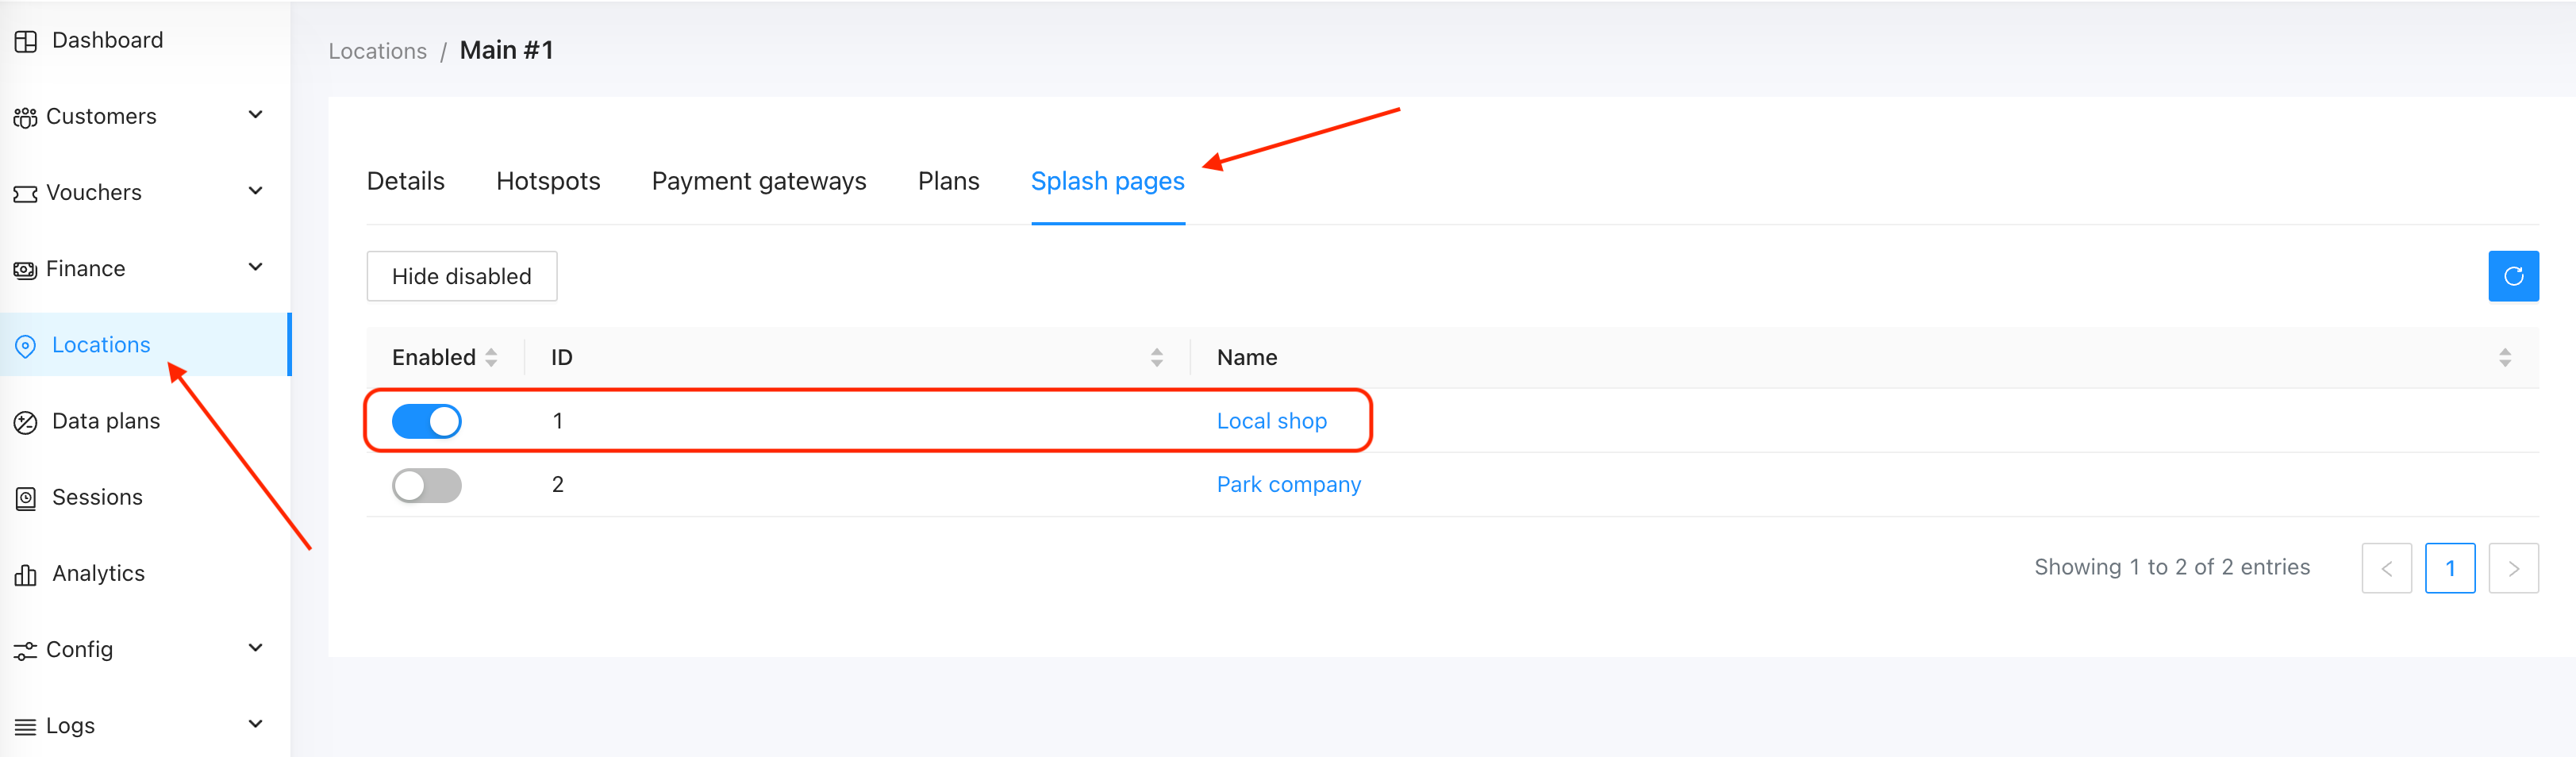 How to enable the Splash page